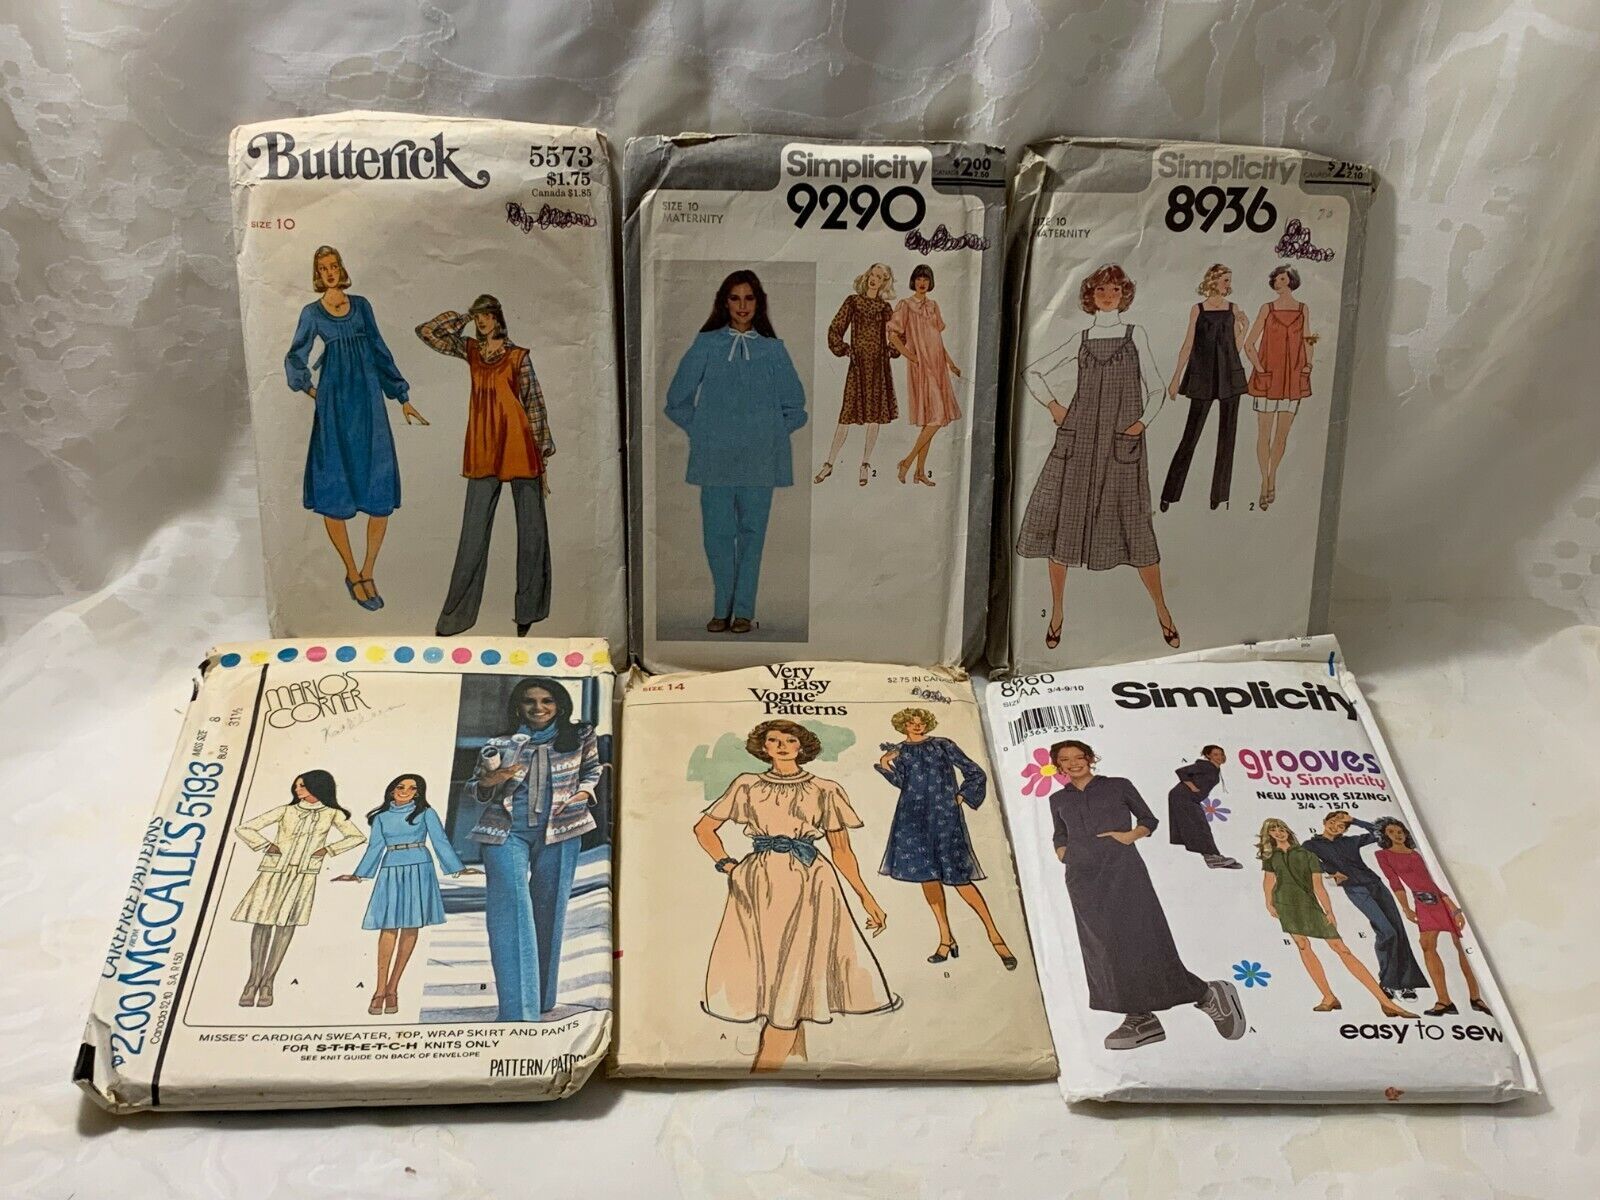 Group of 6 Sewing Patterns Dresses Shirt Skirt Pants & More Simplicity Butterick - $3.90